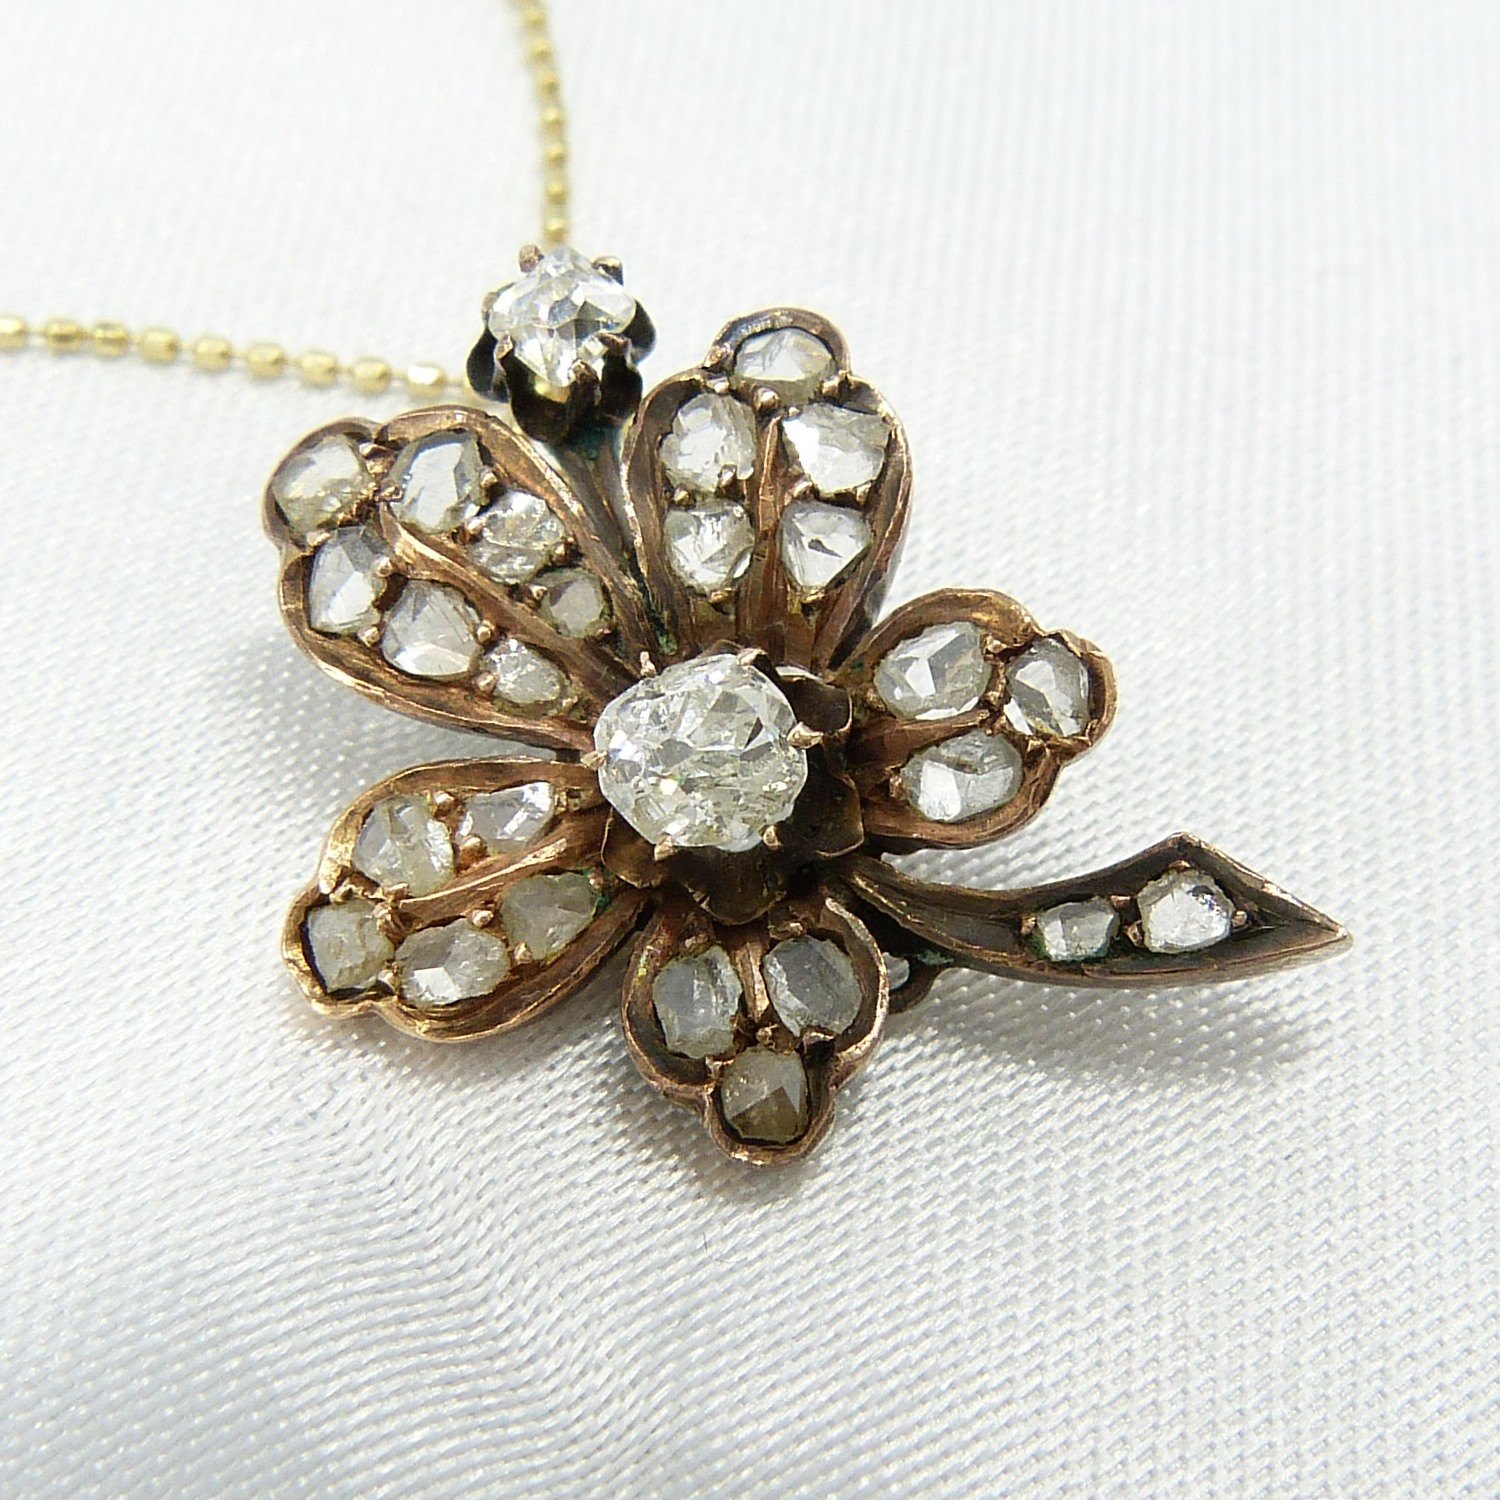 Antique old-cut and rose-cut diamond set flower pendant and chain, 14ct gold - Image 6 of 7